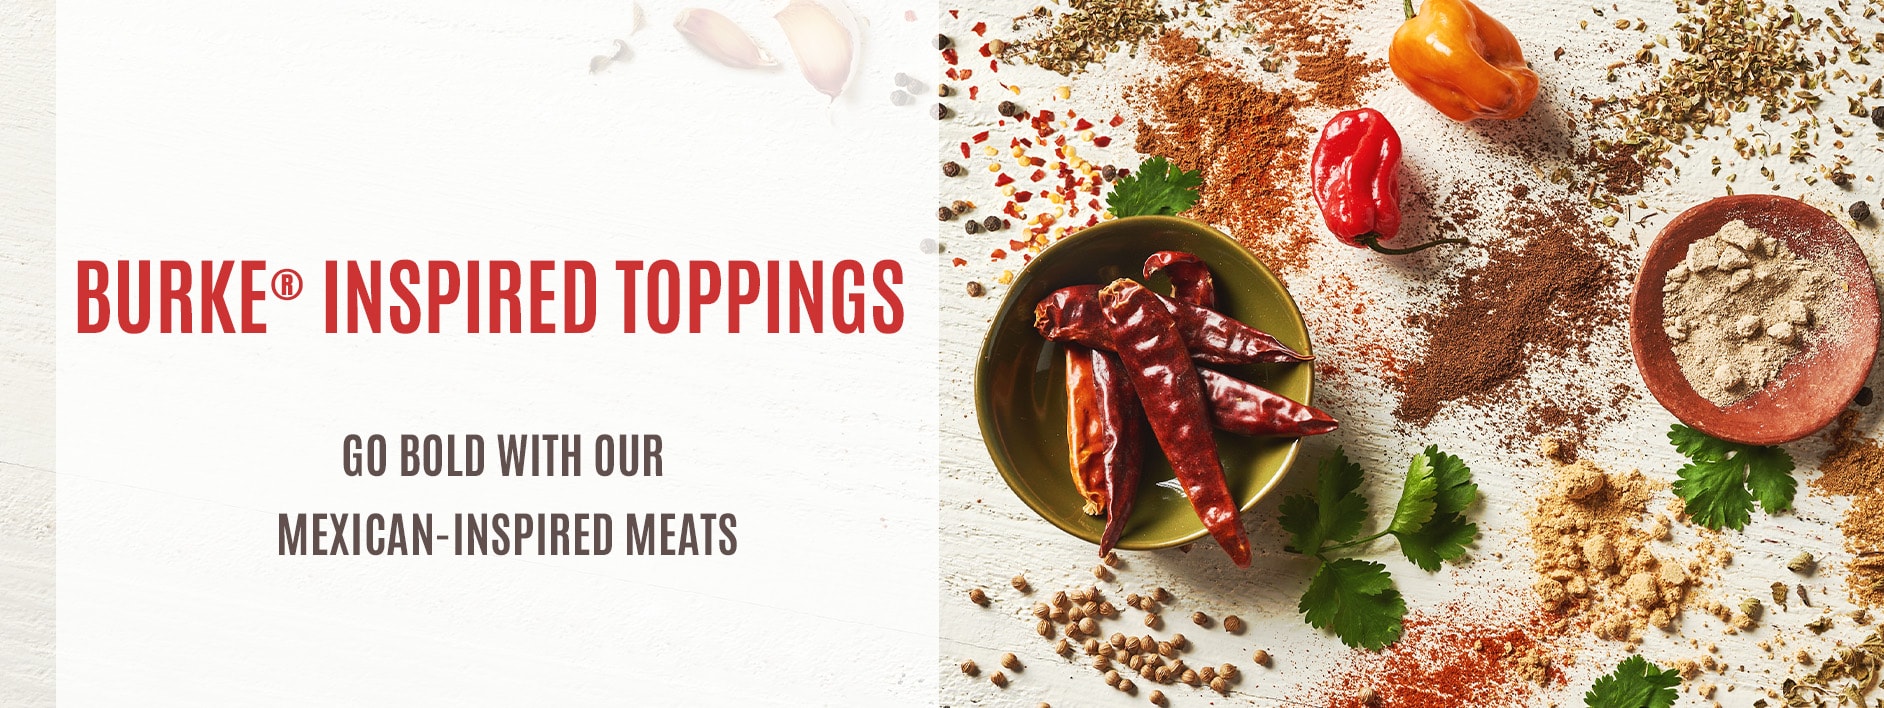 Burke® Inspired Toppings - Go bold with our Mexican-inspired meats